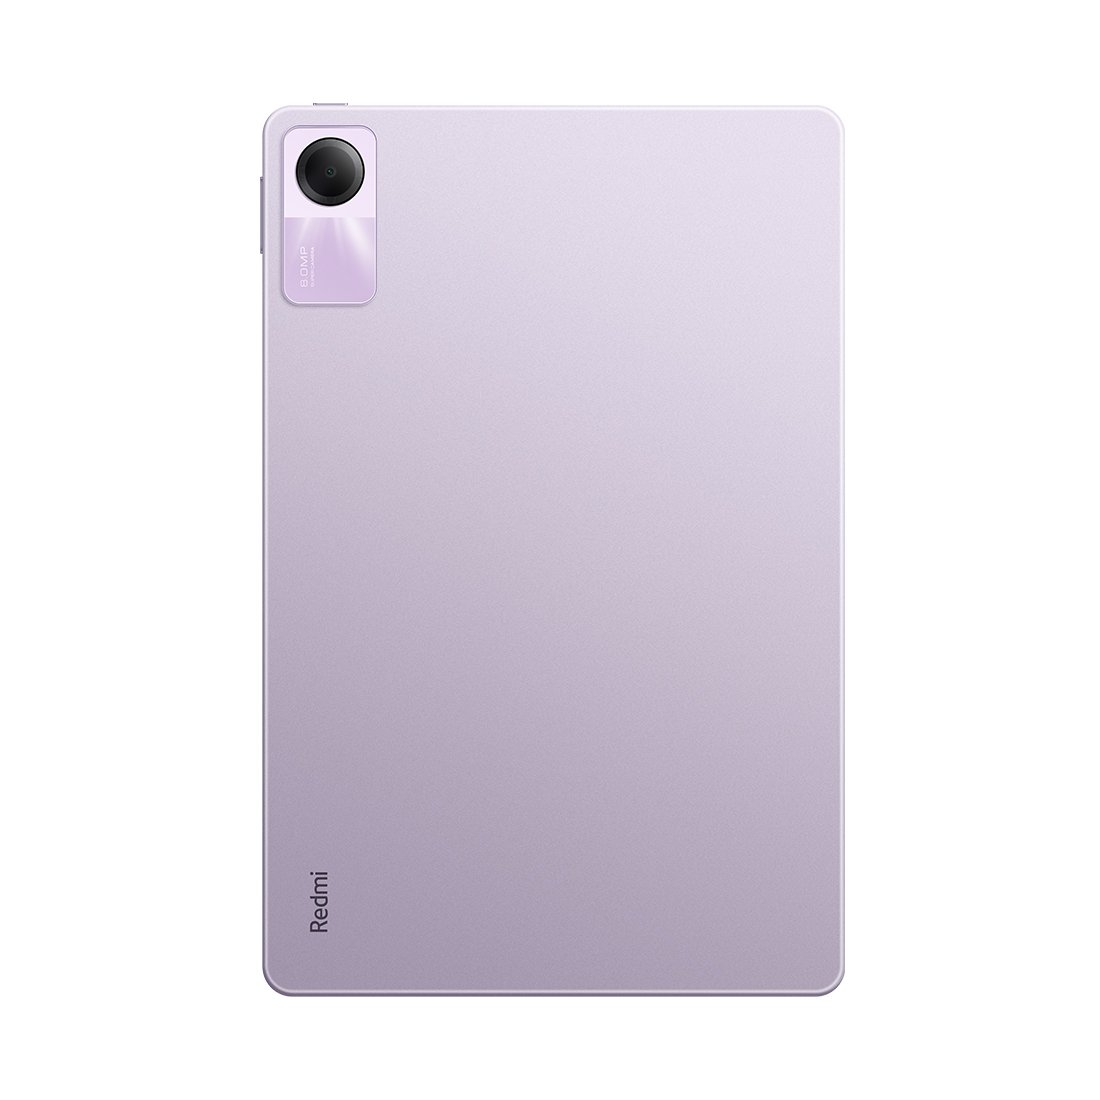 Redmi Pad SE 256GB ROM Price in USA 28-Feb-2024 with Specs and Features